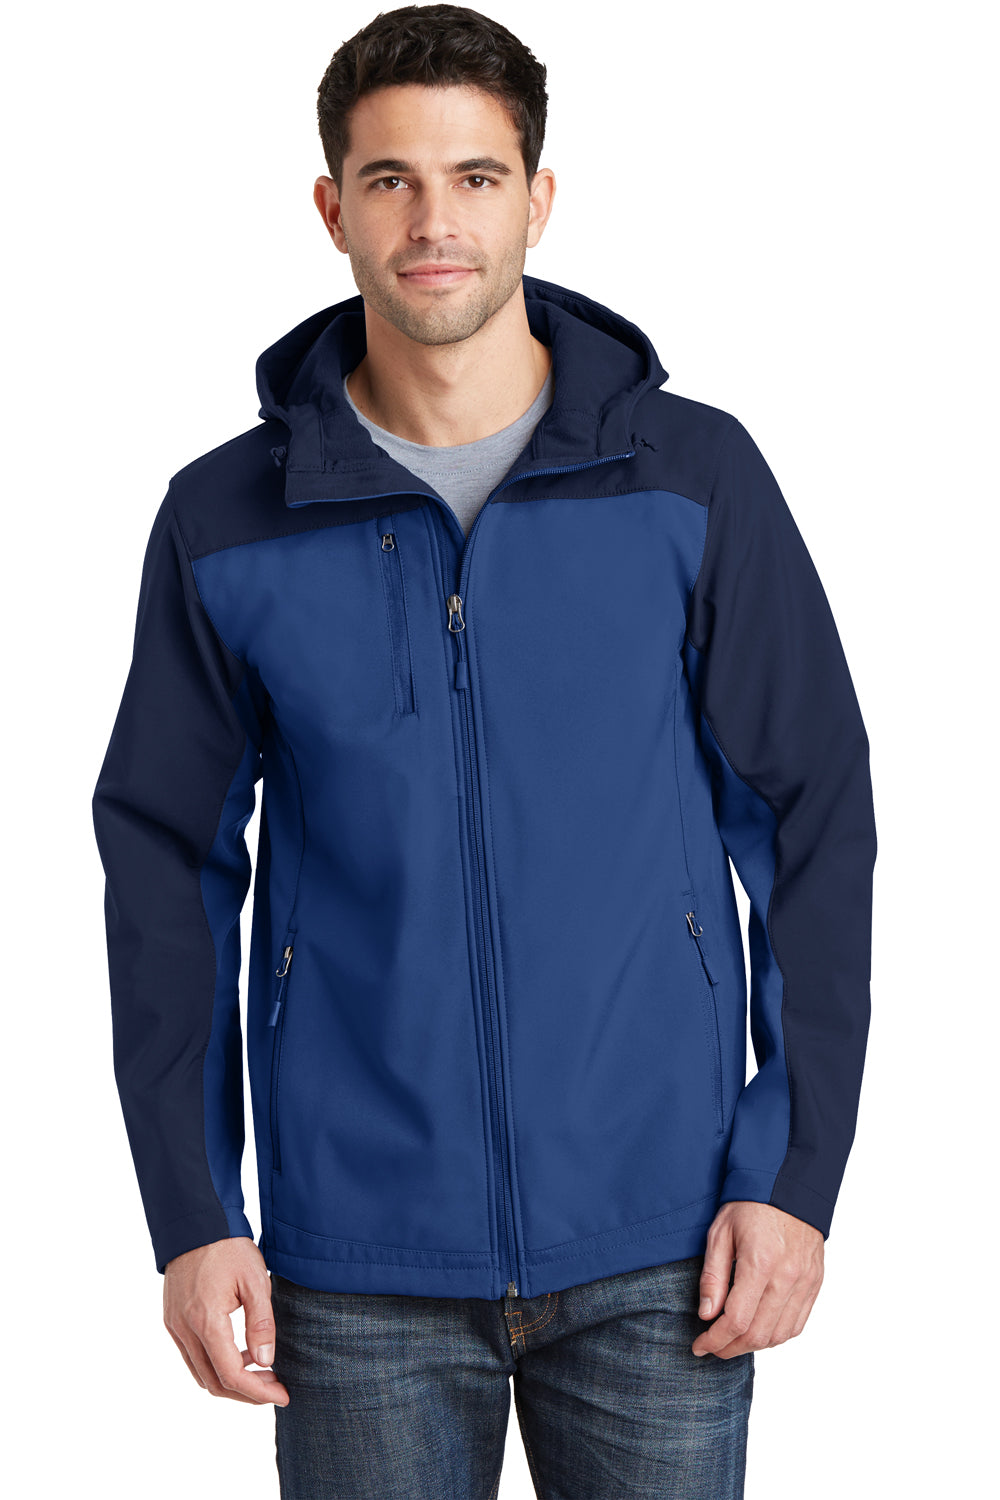 Port Authority J335 Mens Core Wind & Water Resistant Full Zip Hooded Jacket Royal Blue/Navy Blue Front